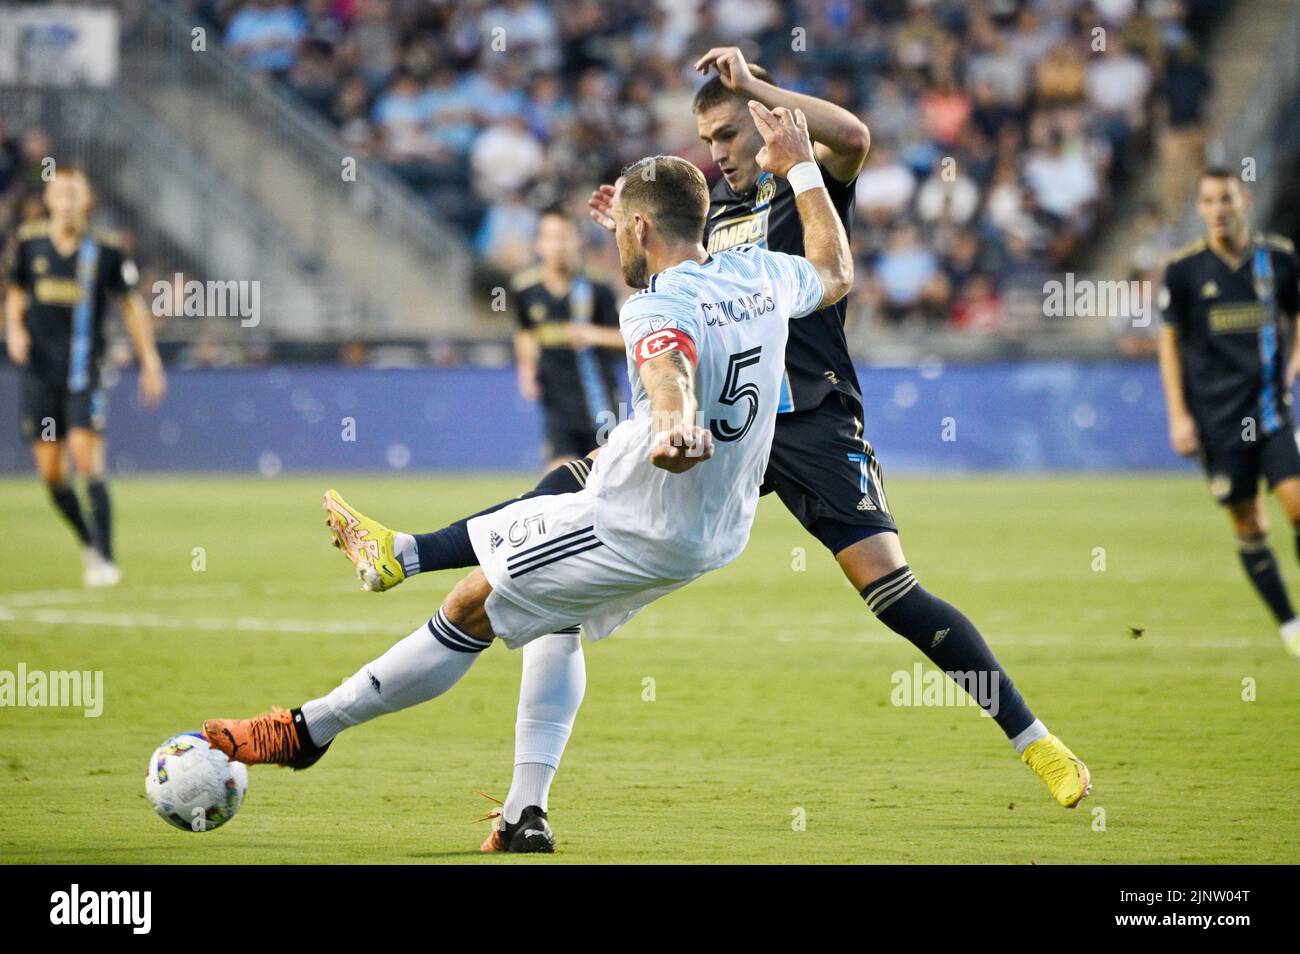 August 13, 2022: August13, 2022, Chester PA- Philadelphia Union player, MIKAEL UHRE (7) and Chicago player, RAFAEL CZICHOS (5) fight for the ball during the match at Subaru Park in Chester PA (Credit Image: © Ricky Fitchett/ZUMA Press Wire) Stock Photo